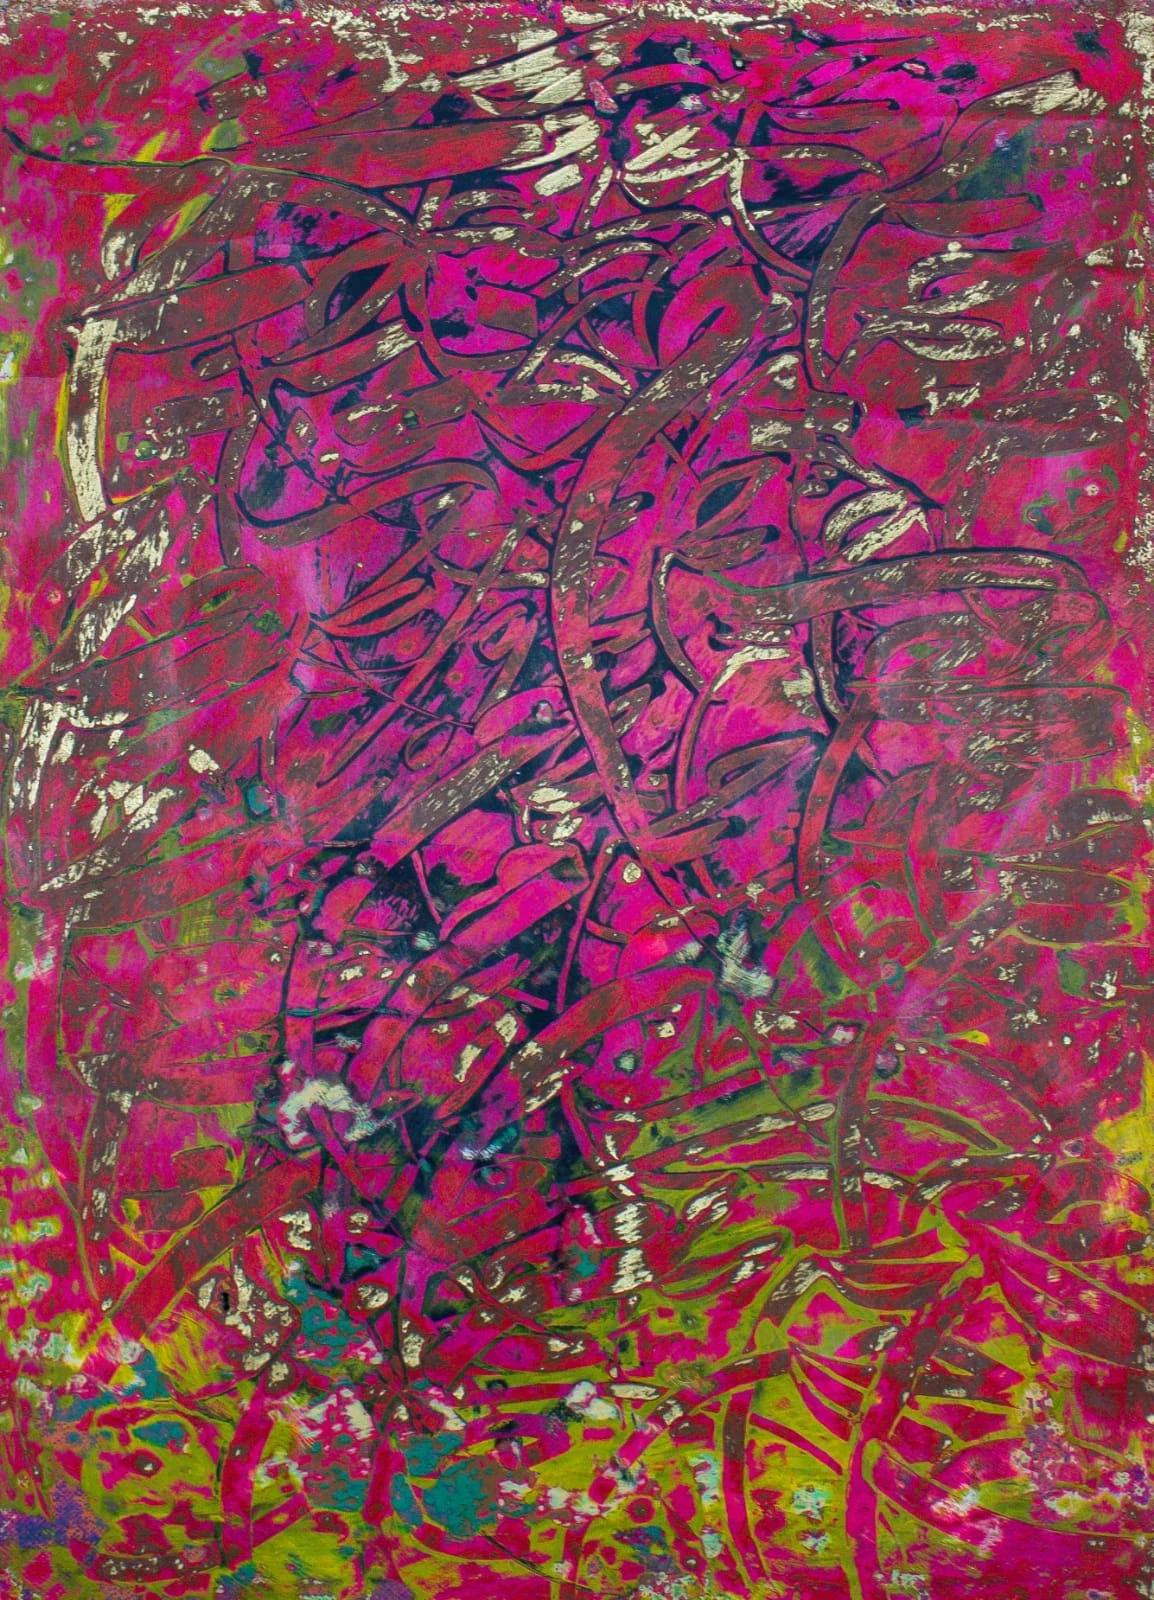 "Abstract Calligraphy" Mixed Media Painting 24" x 16" inch by Ibrahim Khatab

Ibrahim Khatab was born in Cairo 1984, works as a co-teacher in Cairo University, he mixes between painting, video art and installation in his artworks. He started since